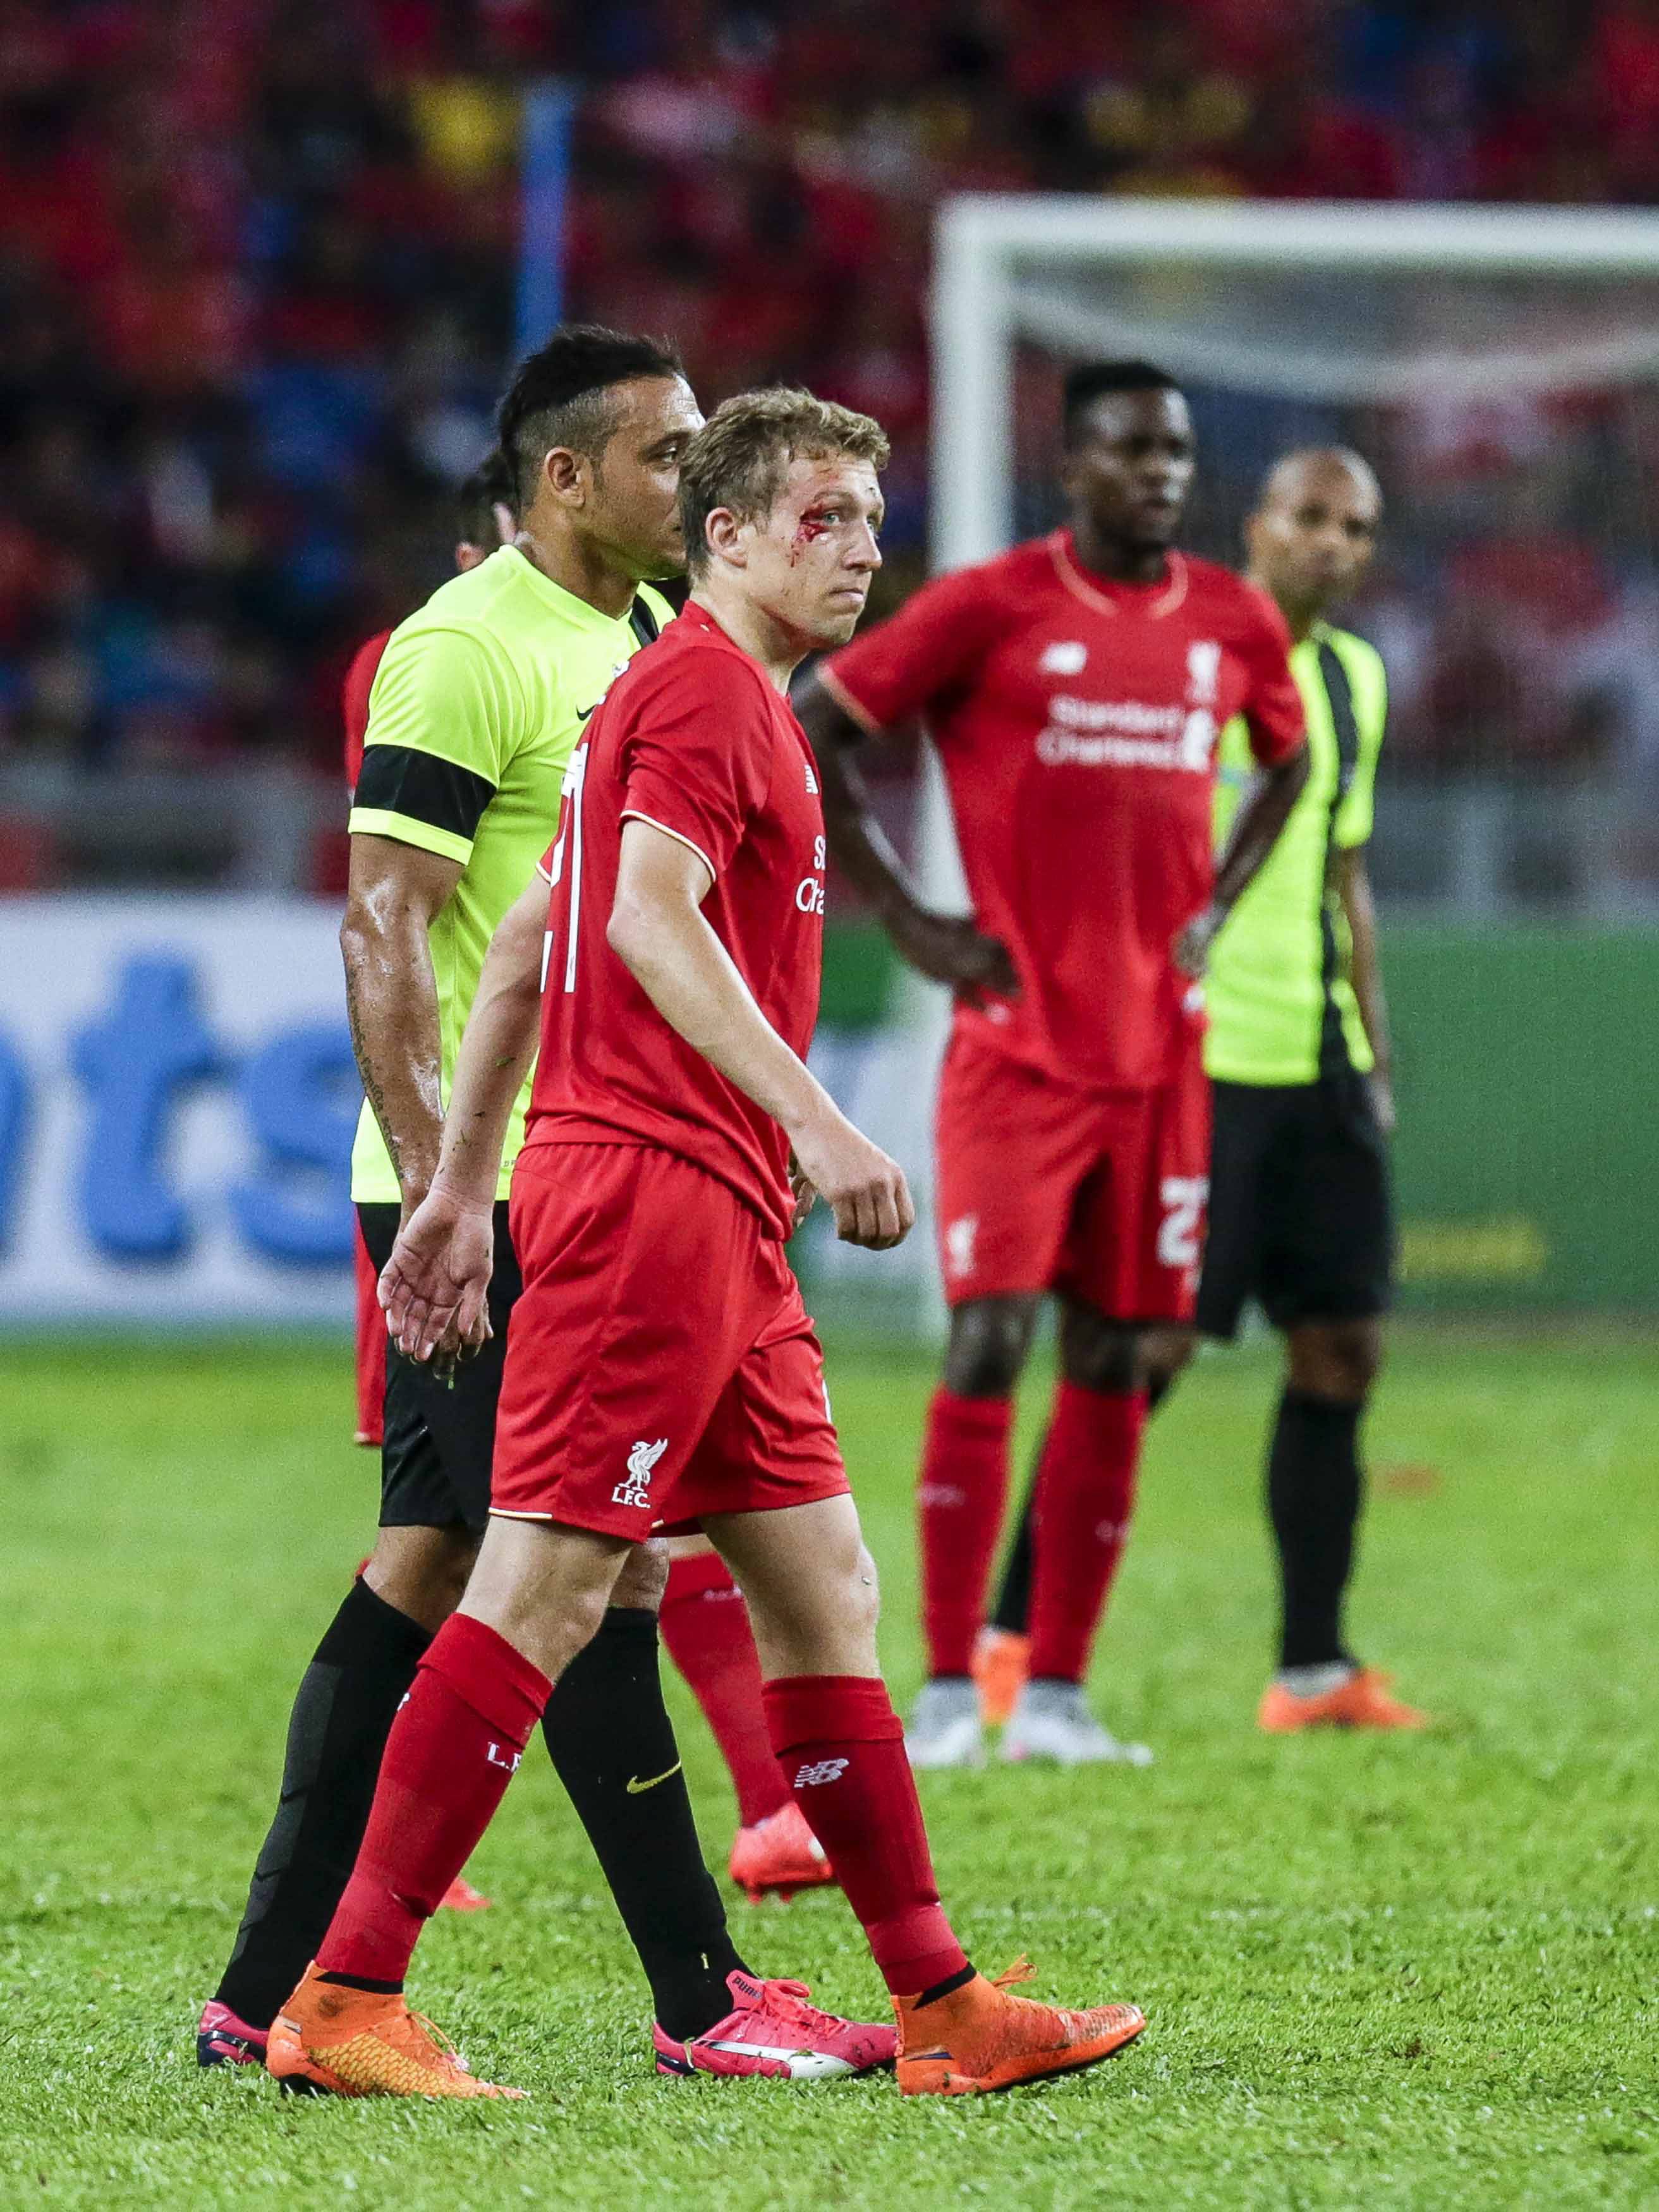 Lucas loves Liverpool and has bled for the Reds' often on the pitch but the Brazilian understands he must move on if he wants to play regular first-team football. (Picture Courtesy - AFP/Getty Images)